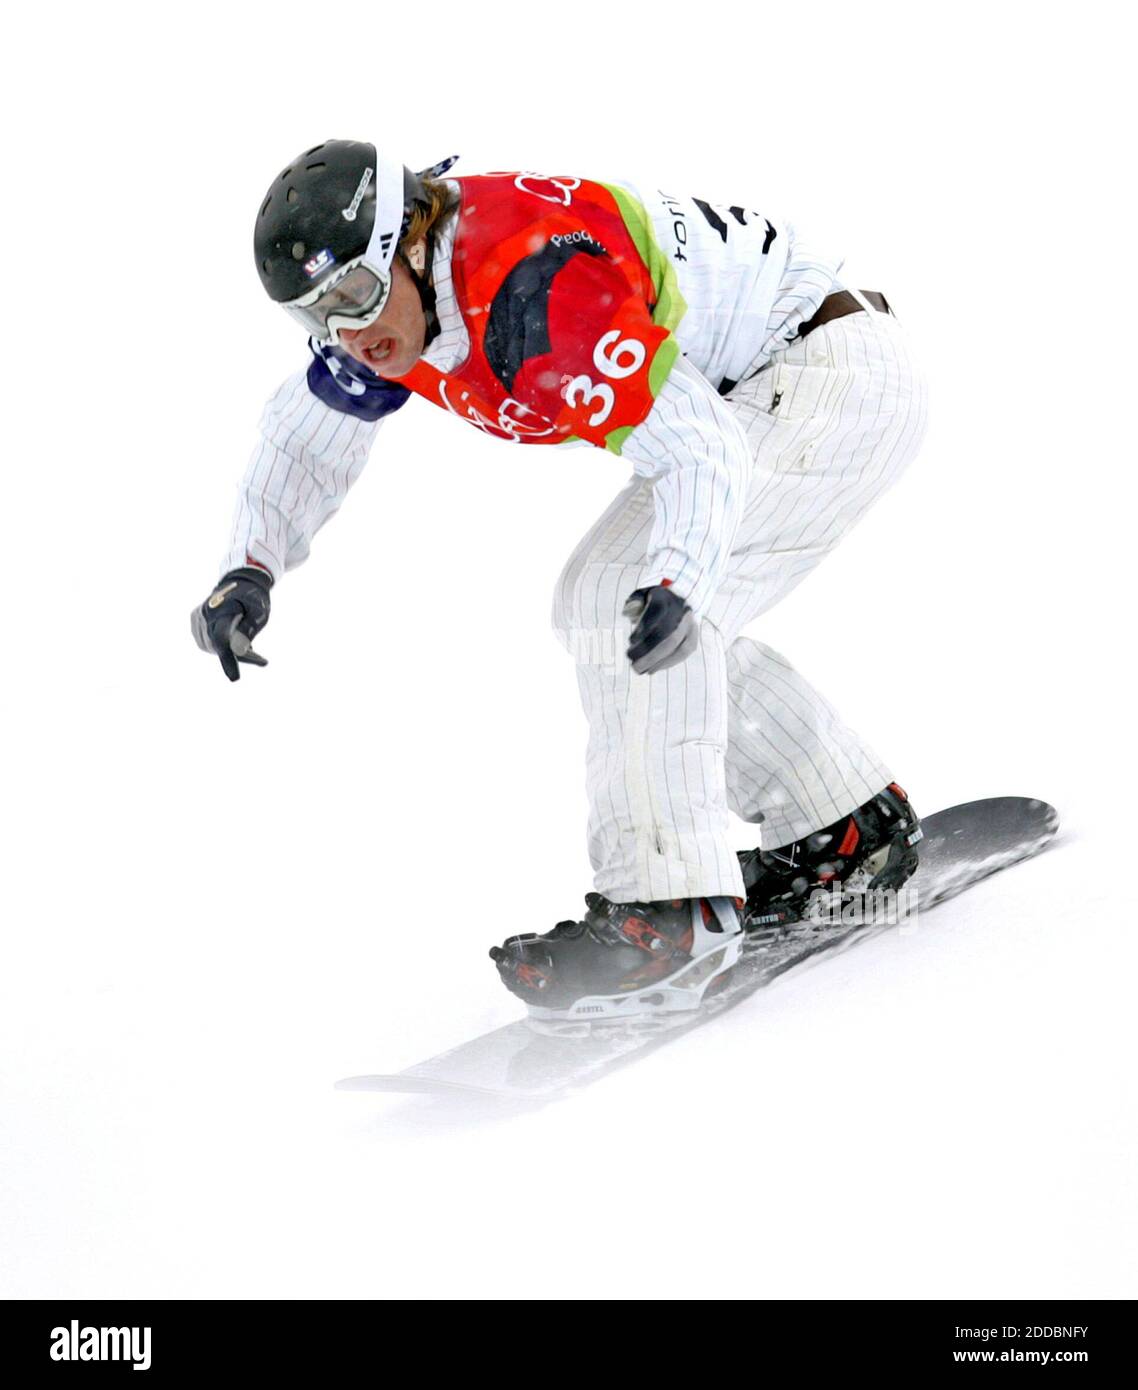 NO FILM, NO VIDEO, NO TV, NO DOCUMENTARY - Nate Holland of the United States slides down the hill during qualification for snowboard-cross in Bardonecchia, Italy on February 16, 2006, at the Olympic Winter Games, in Turin. Photo by Joe Rimkus Jr./Miami Herald/ KRT/Cameleon/ABACAPRESS.COM Stock Photo